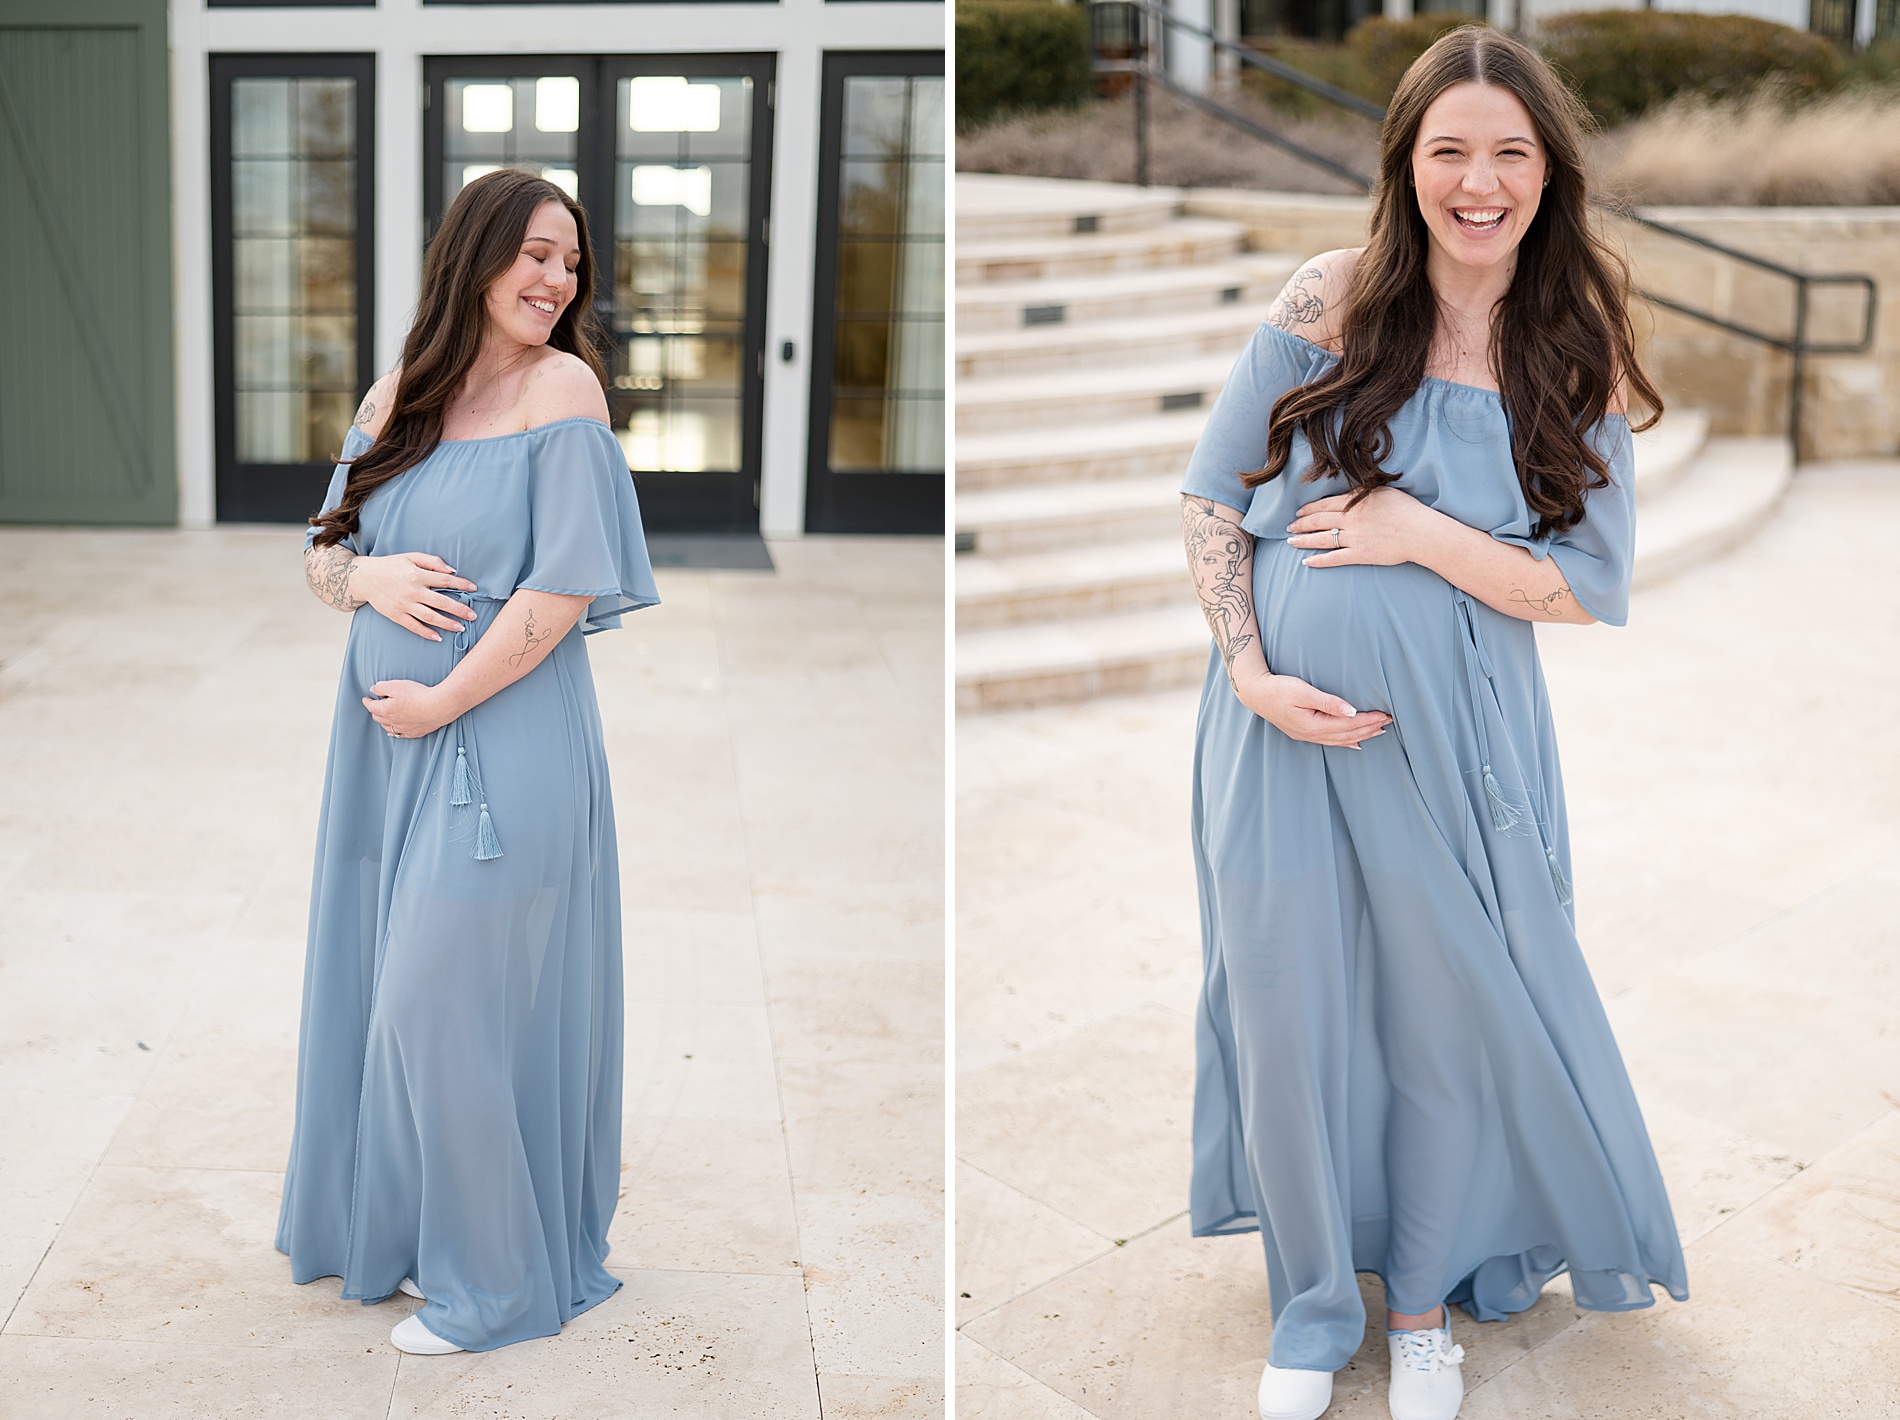 maternity portraits at The Carriage House taken by Lindsey Dutton Photography, a Dallas maternity photographer
